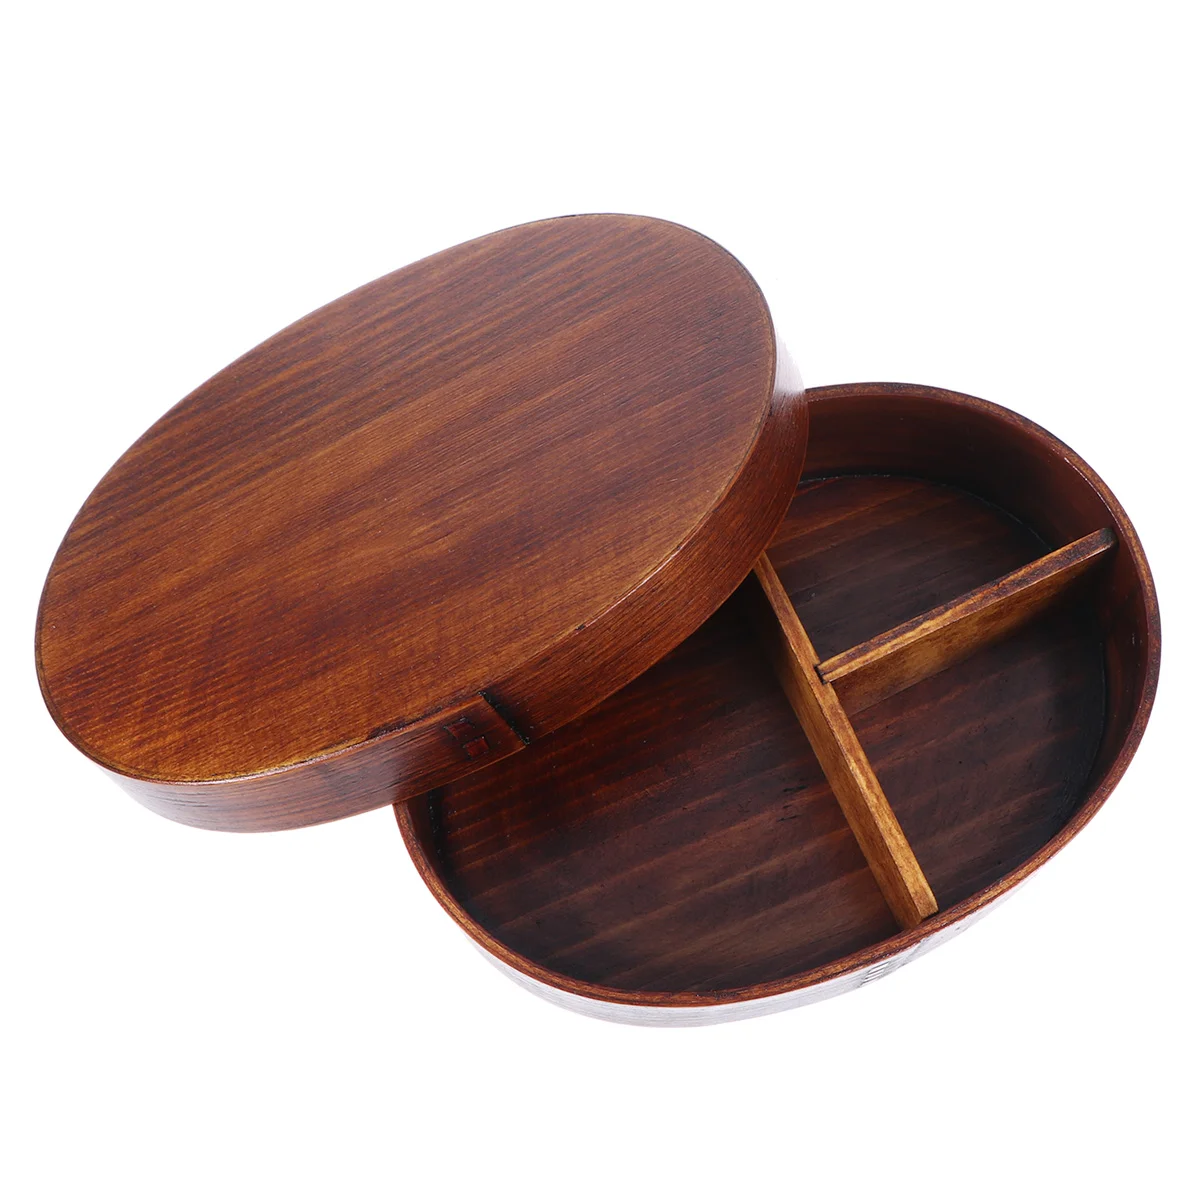 

Japanese Food Container Sandwich Wood Serving Box Meal Prepping Containers Style Lunch Adult Bento Picnic Boxes Wooden Bowl